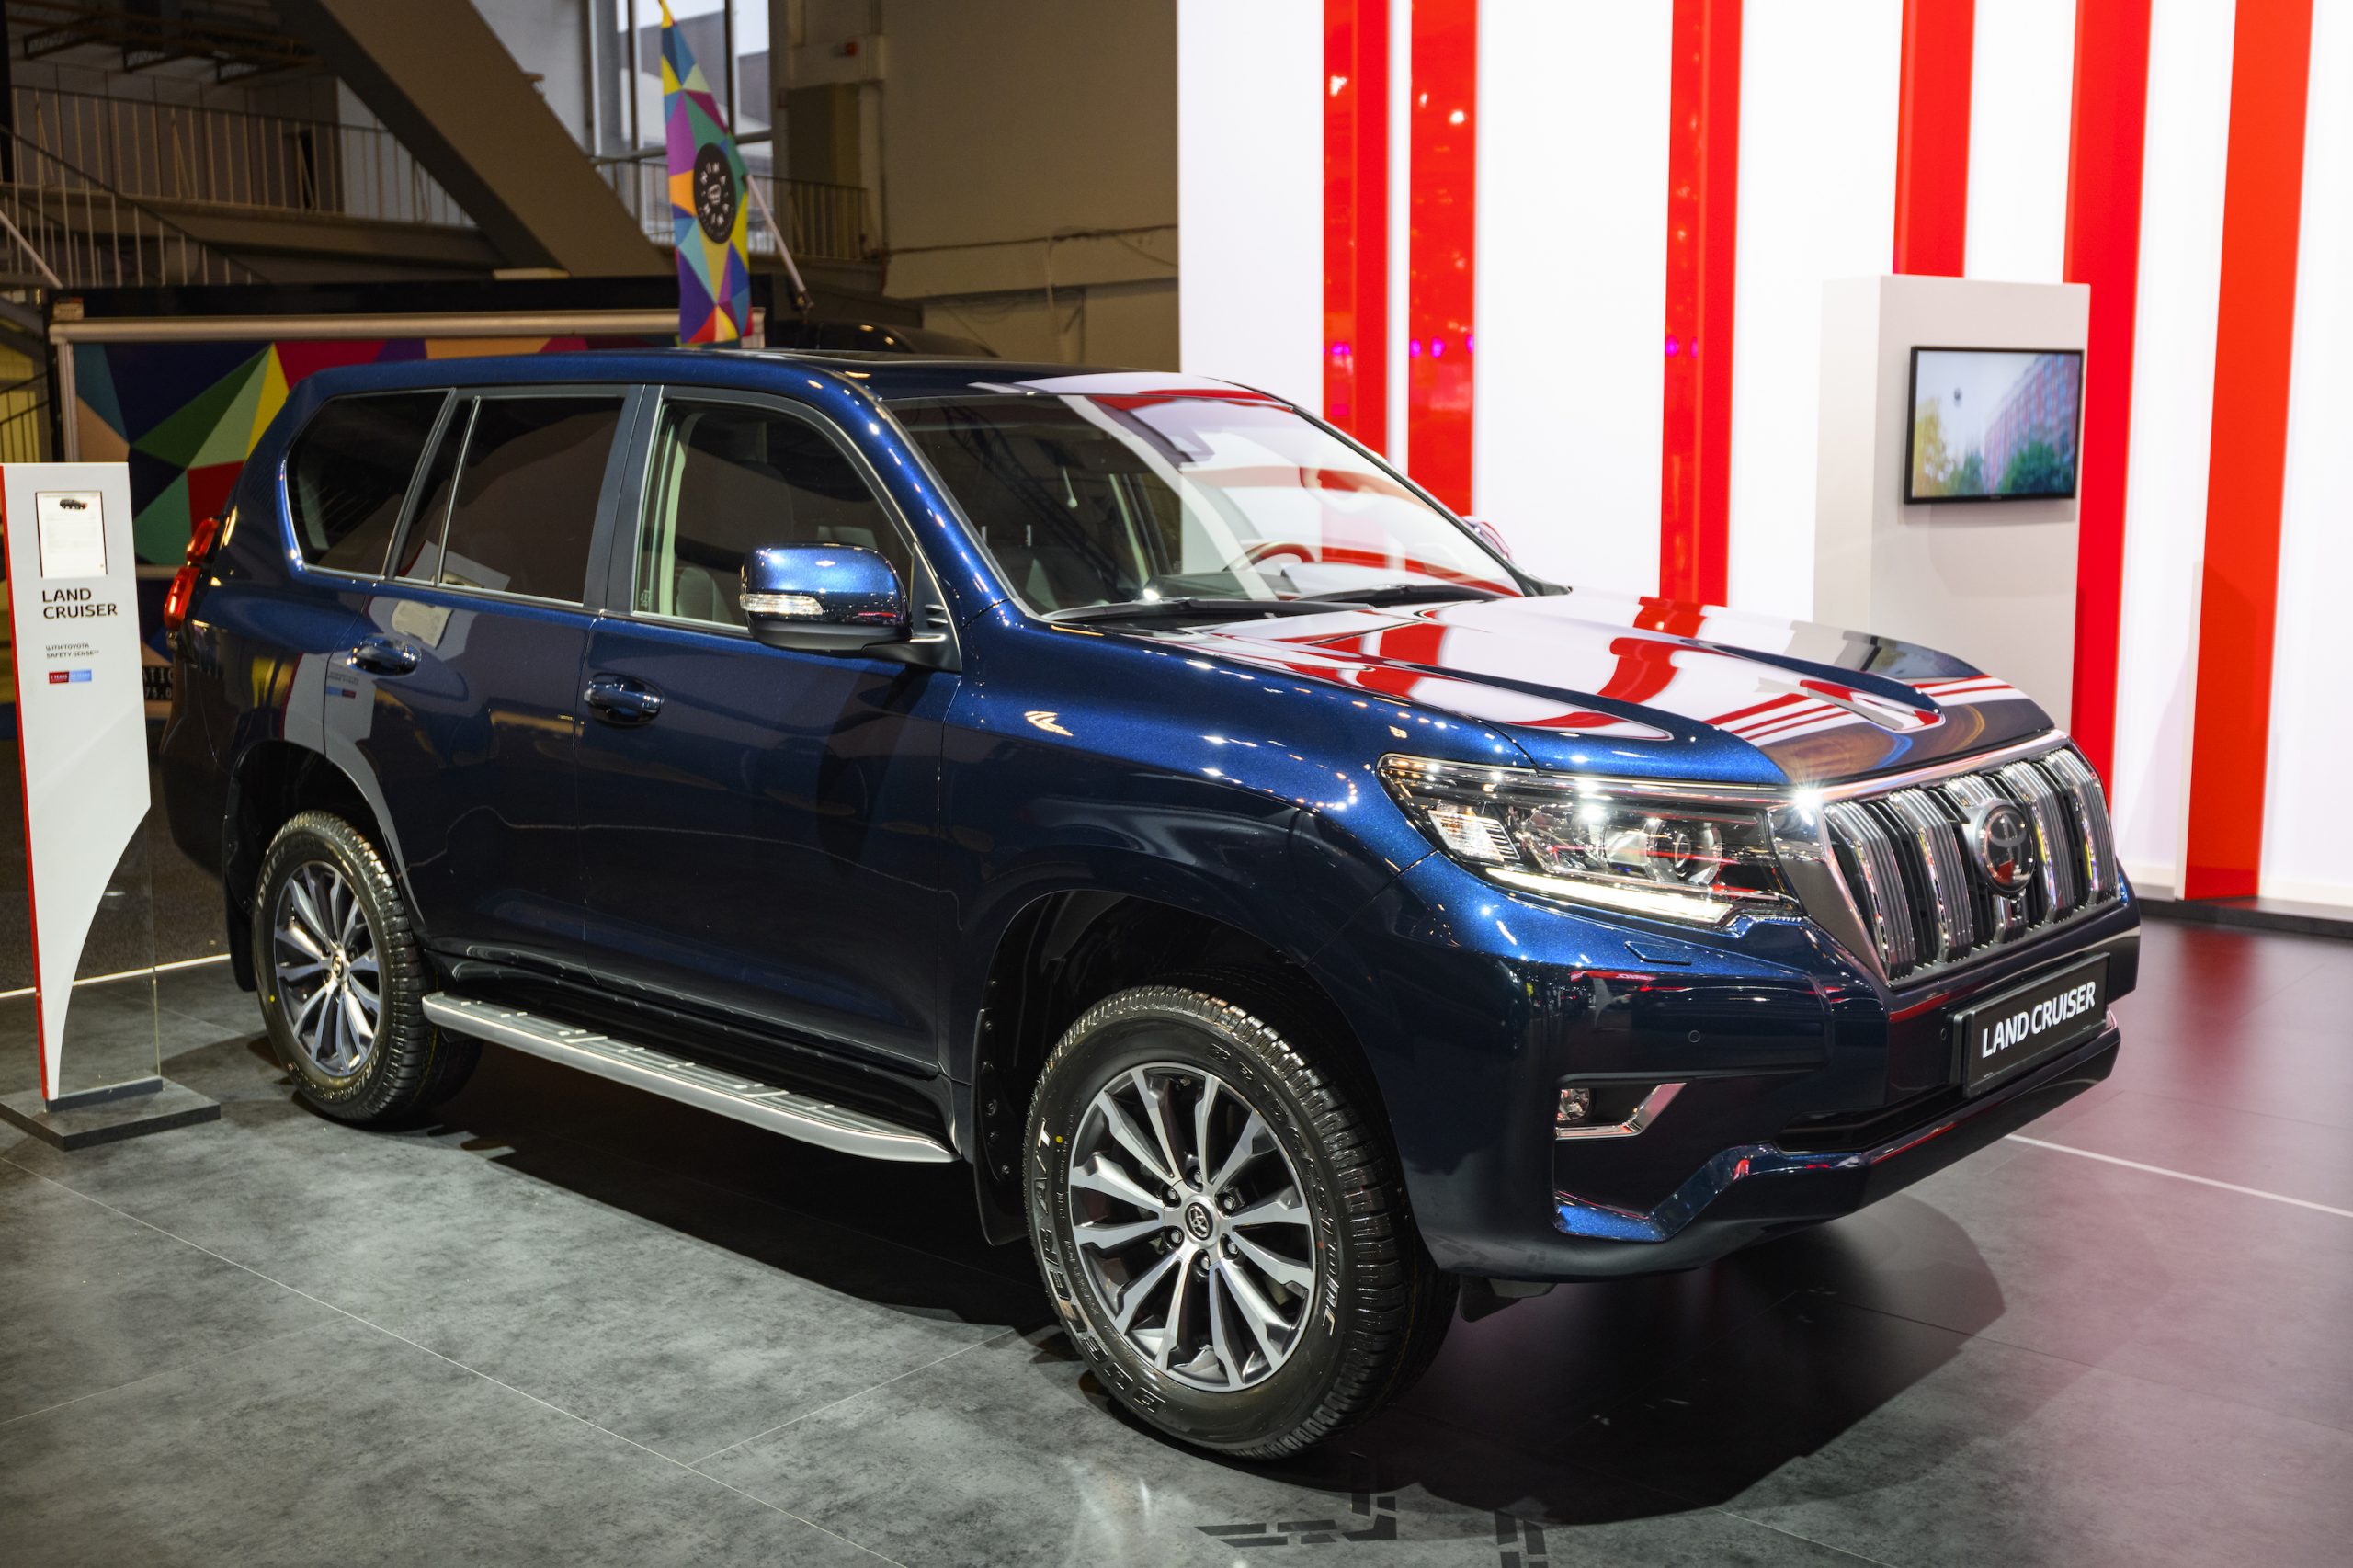 Blue Toyota Land Cruiser off road SUV on display at Brussels Expo